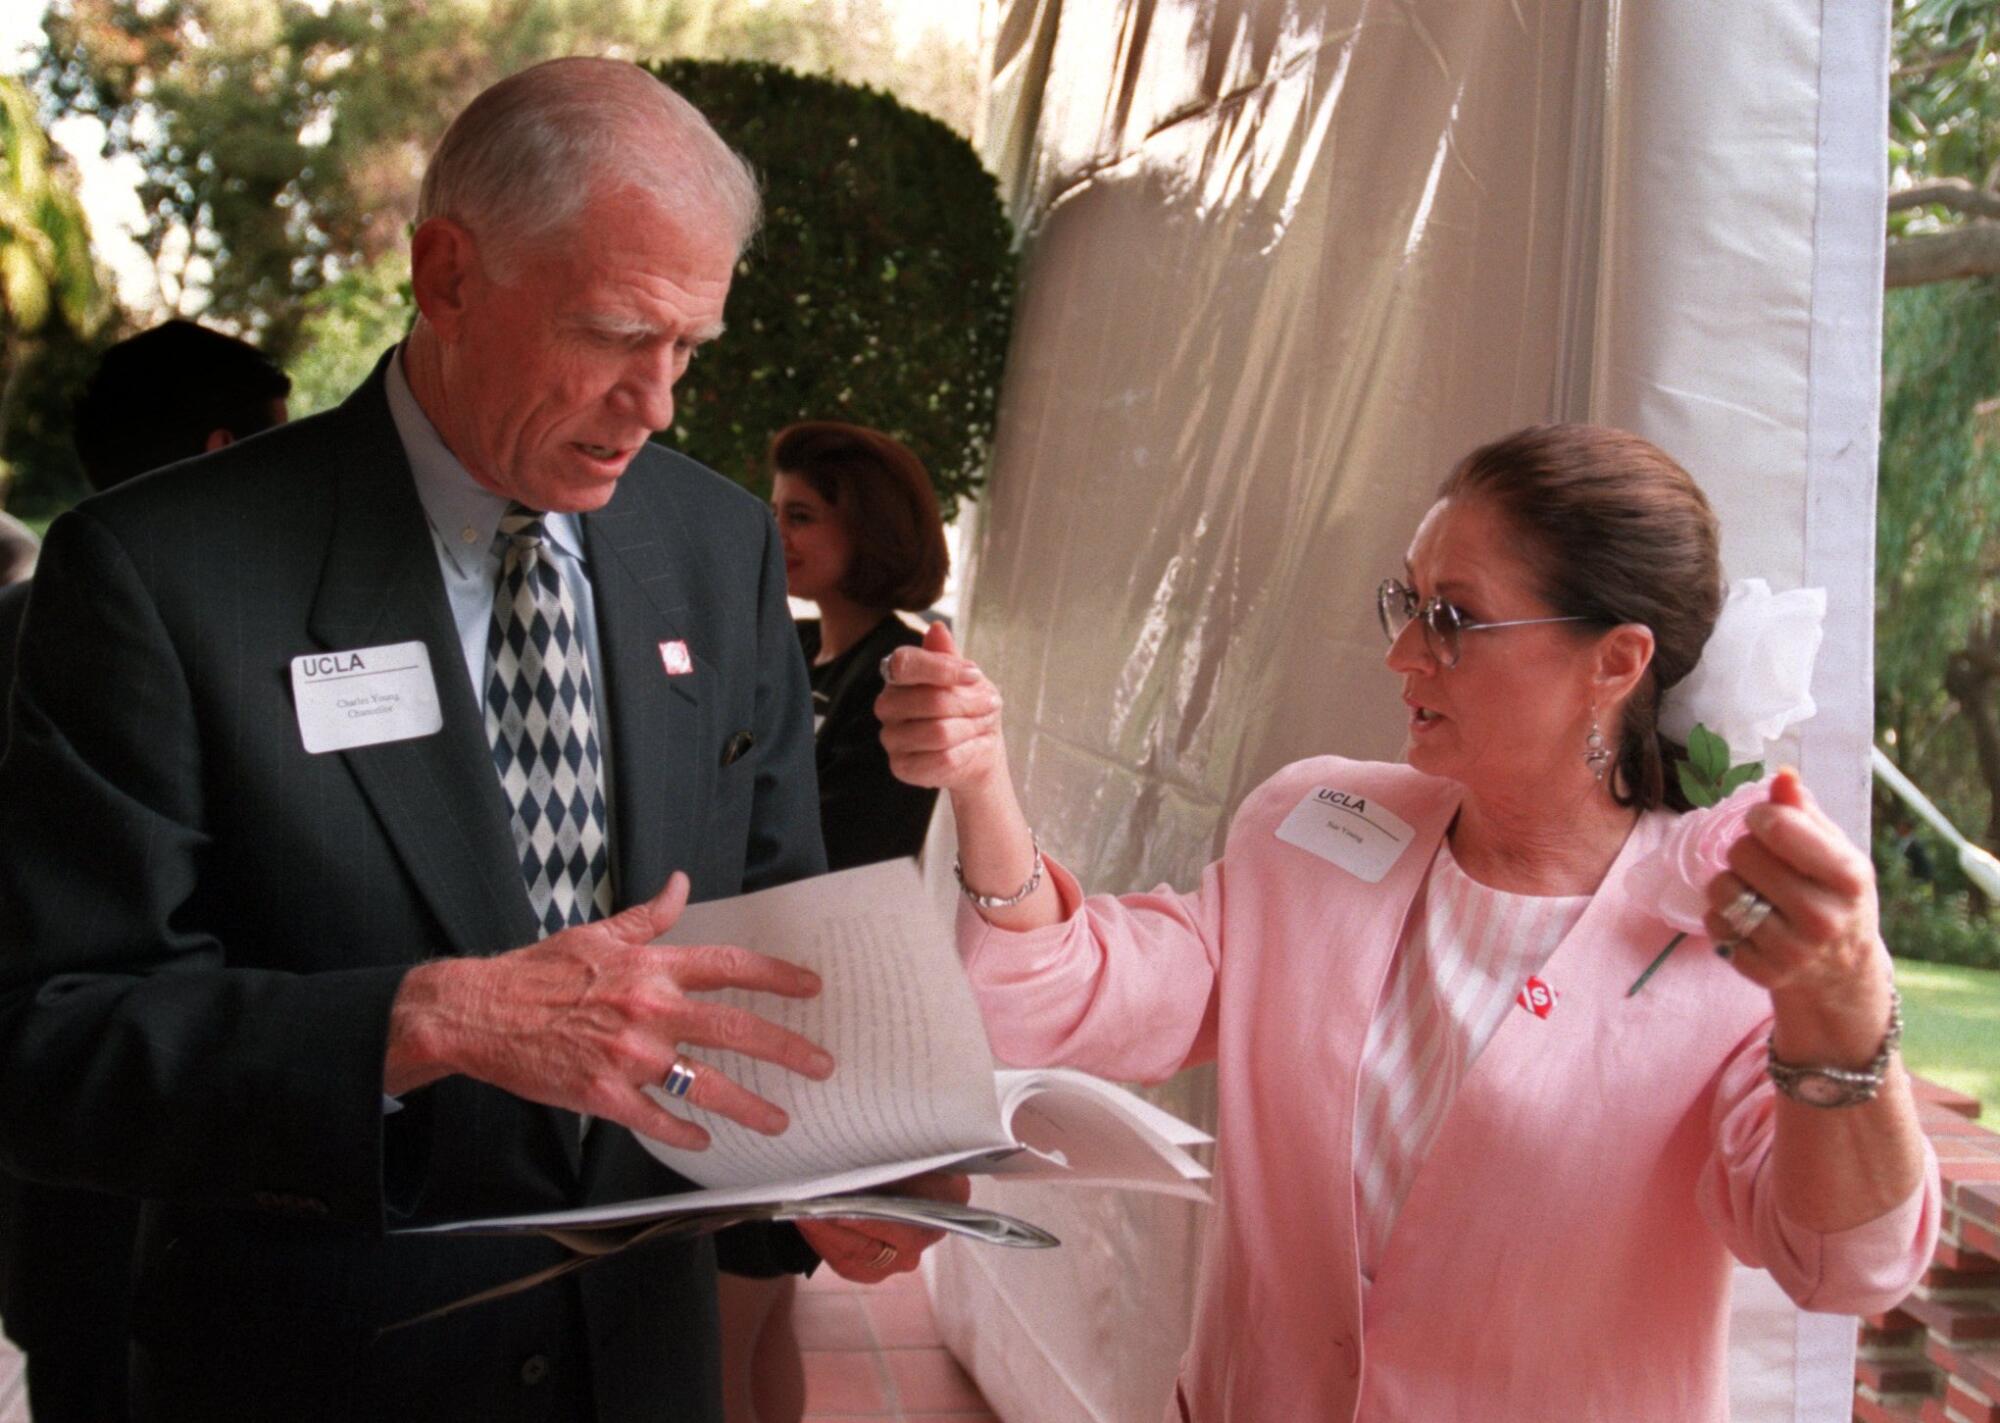 UCLA Chancellor Charles E. Young goes over his notes as his wife, Sue.